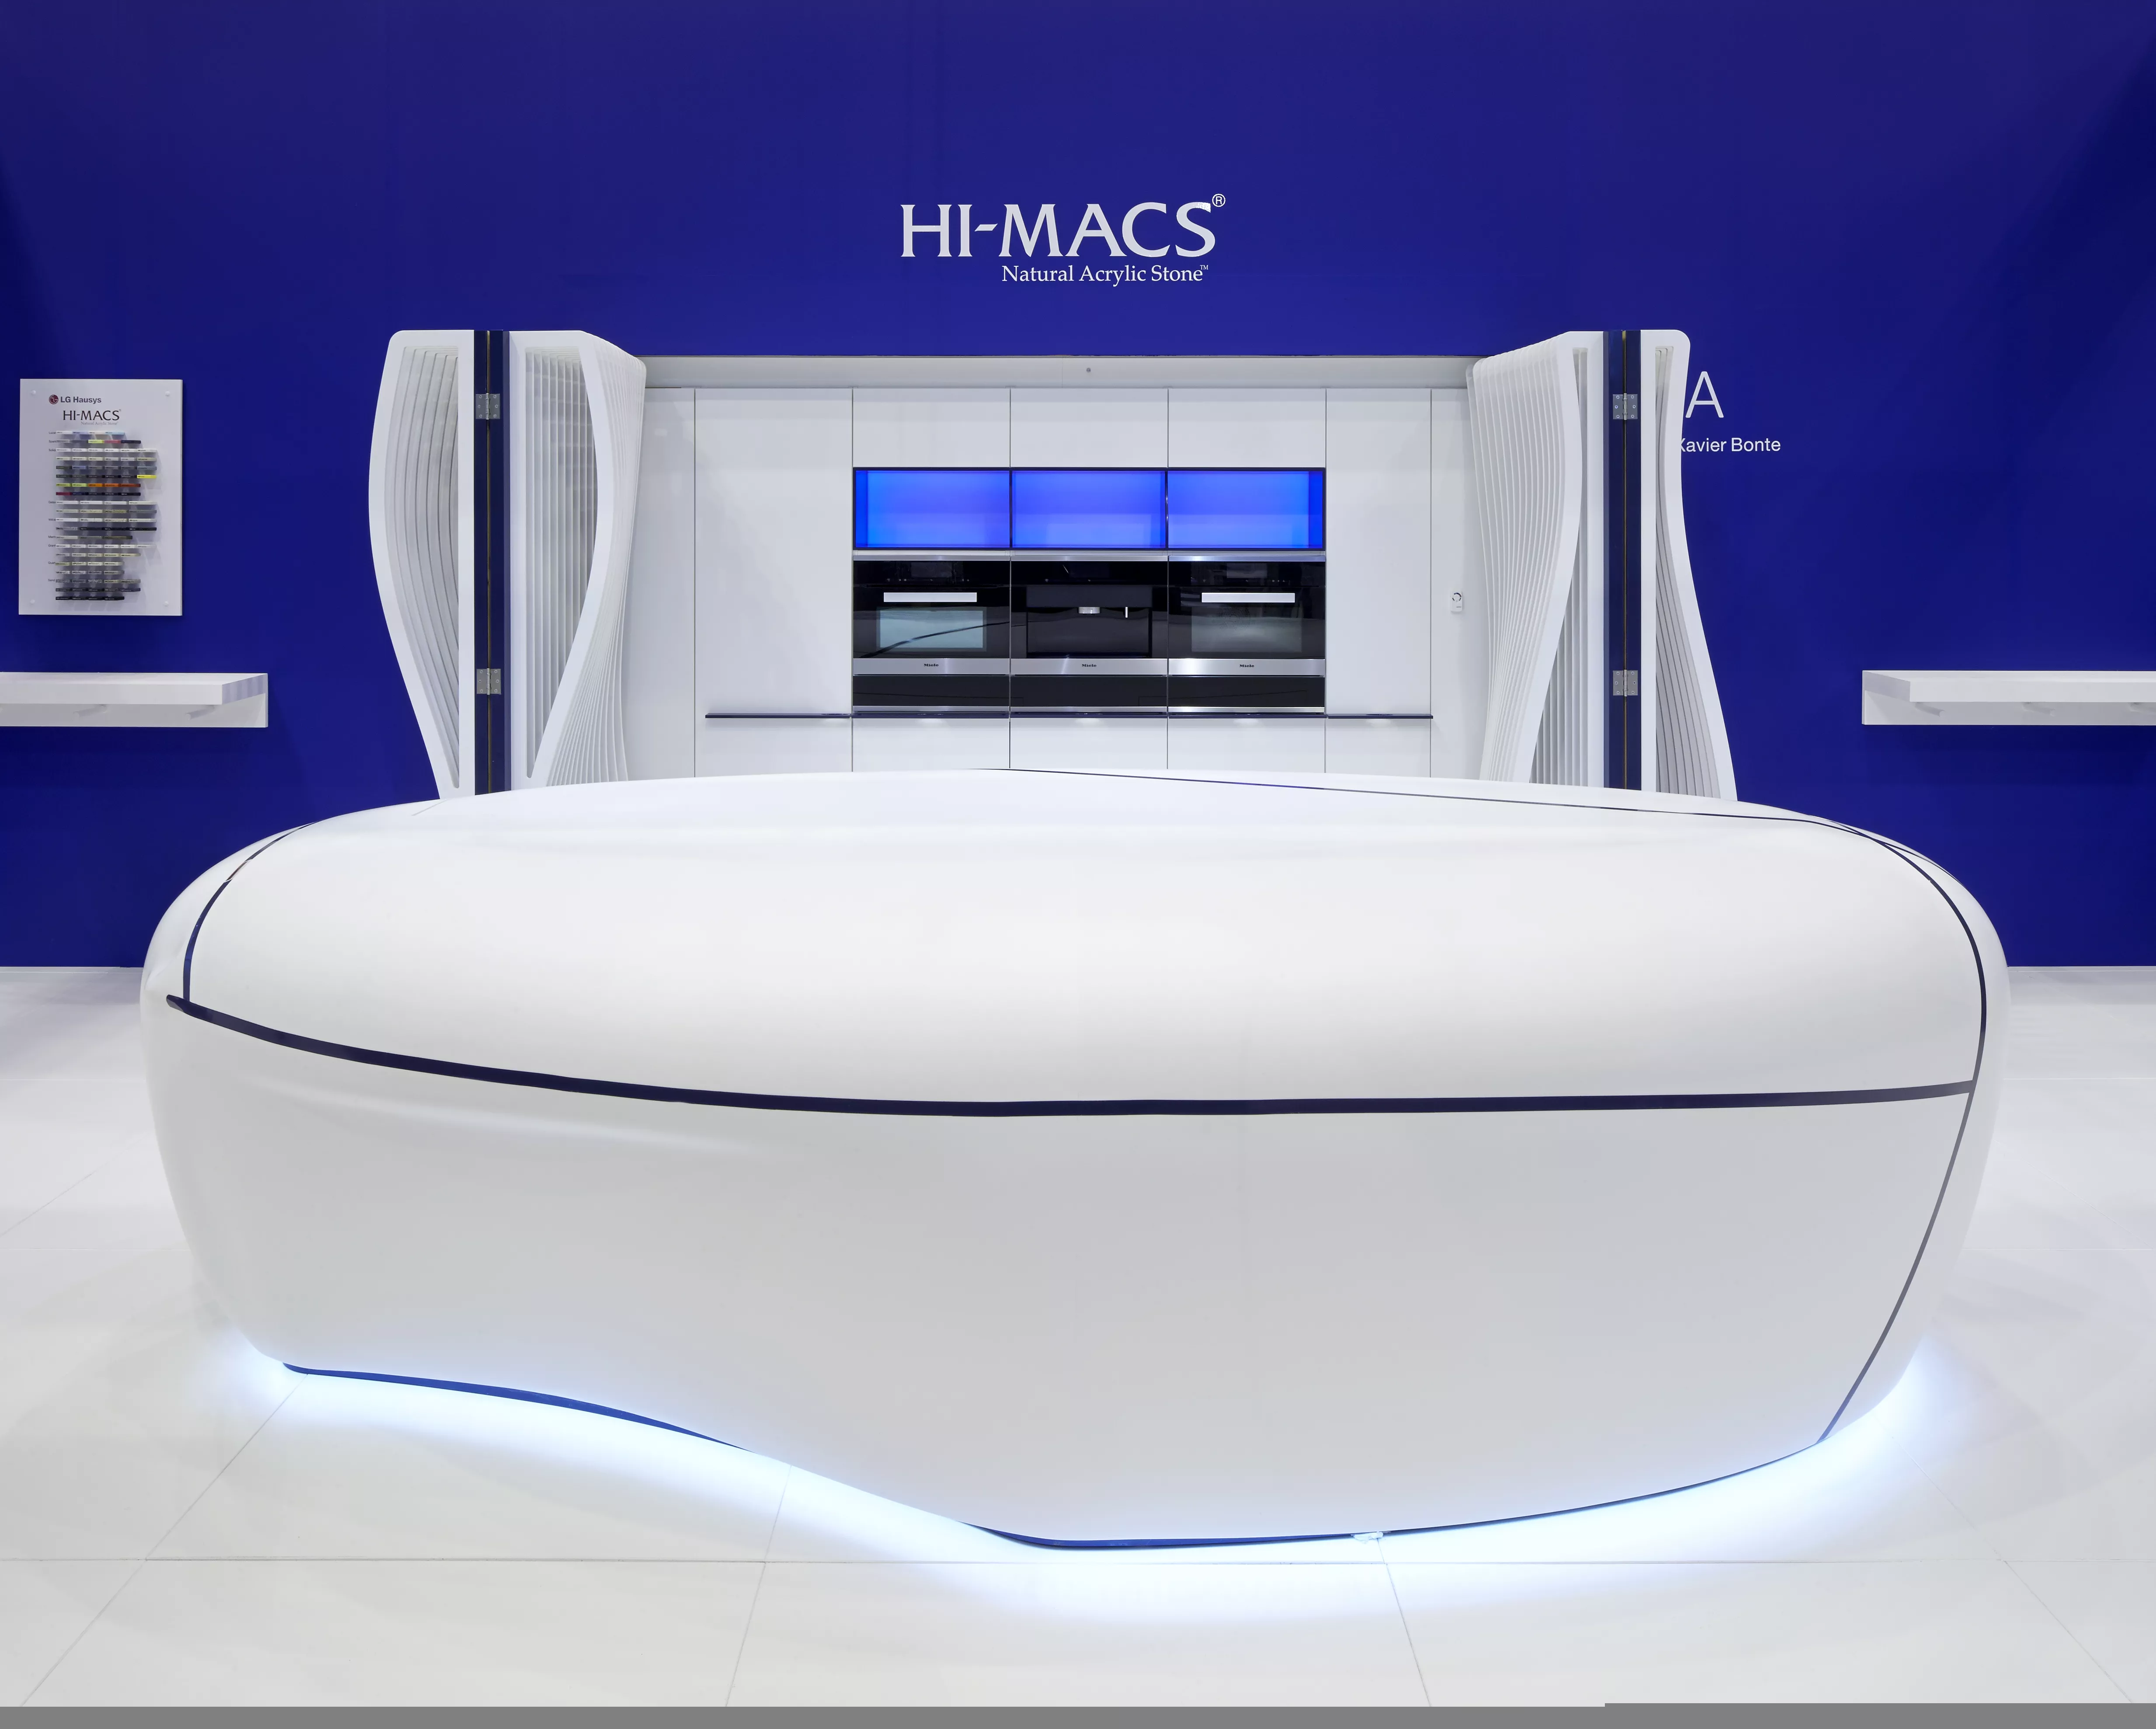 HIMACS – The Sky is the Limit at 100% Design